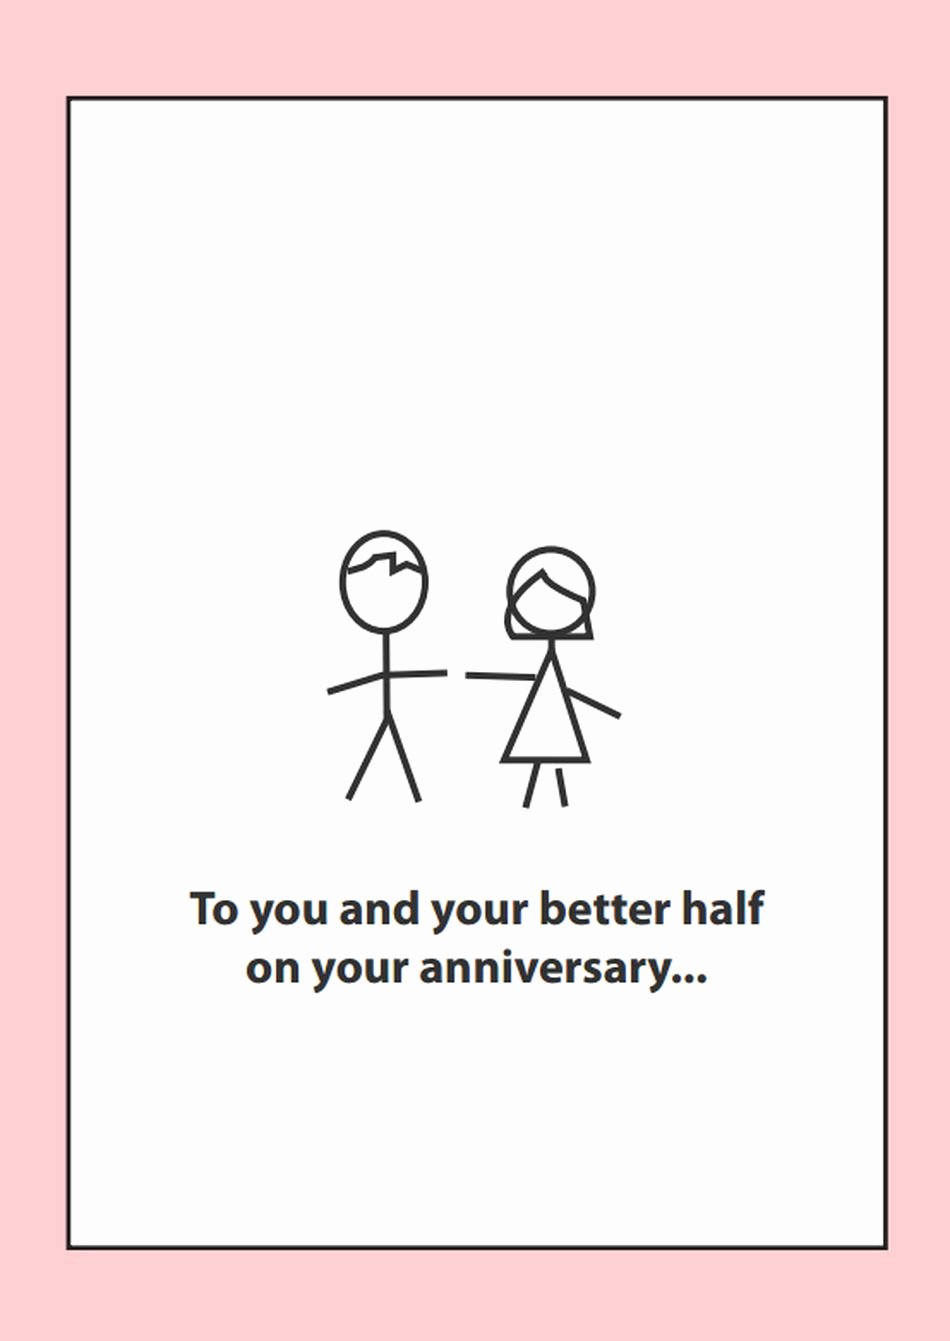 Free Printable Wedding Cards Lovely 16 Free Anniversary Cards You Can Print